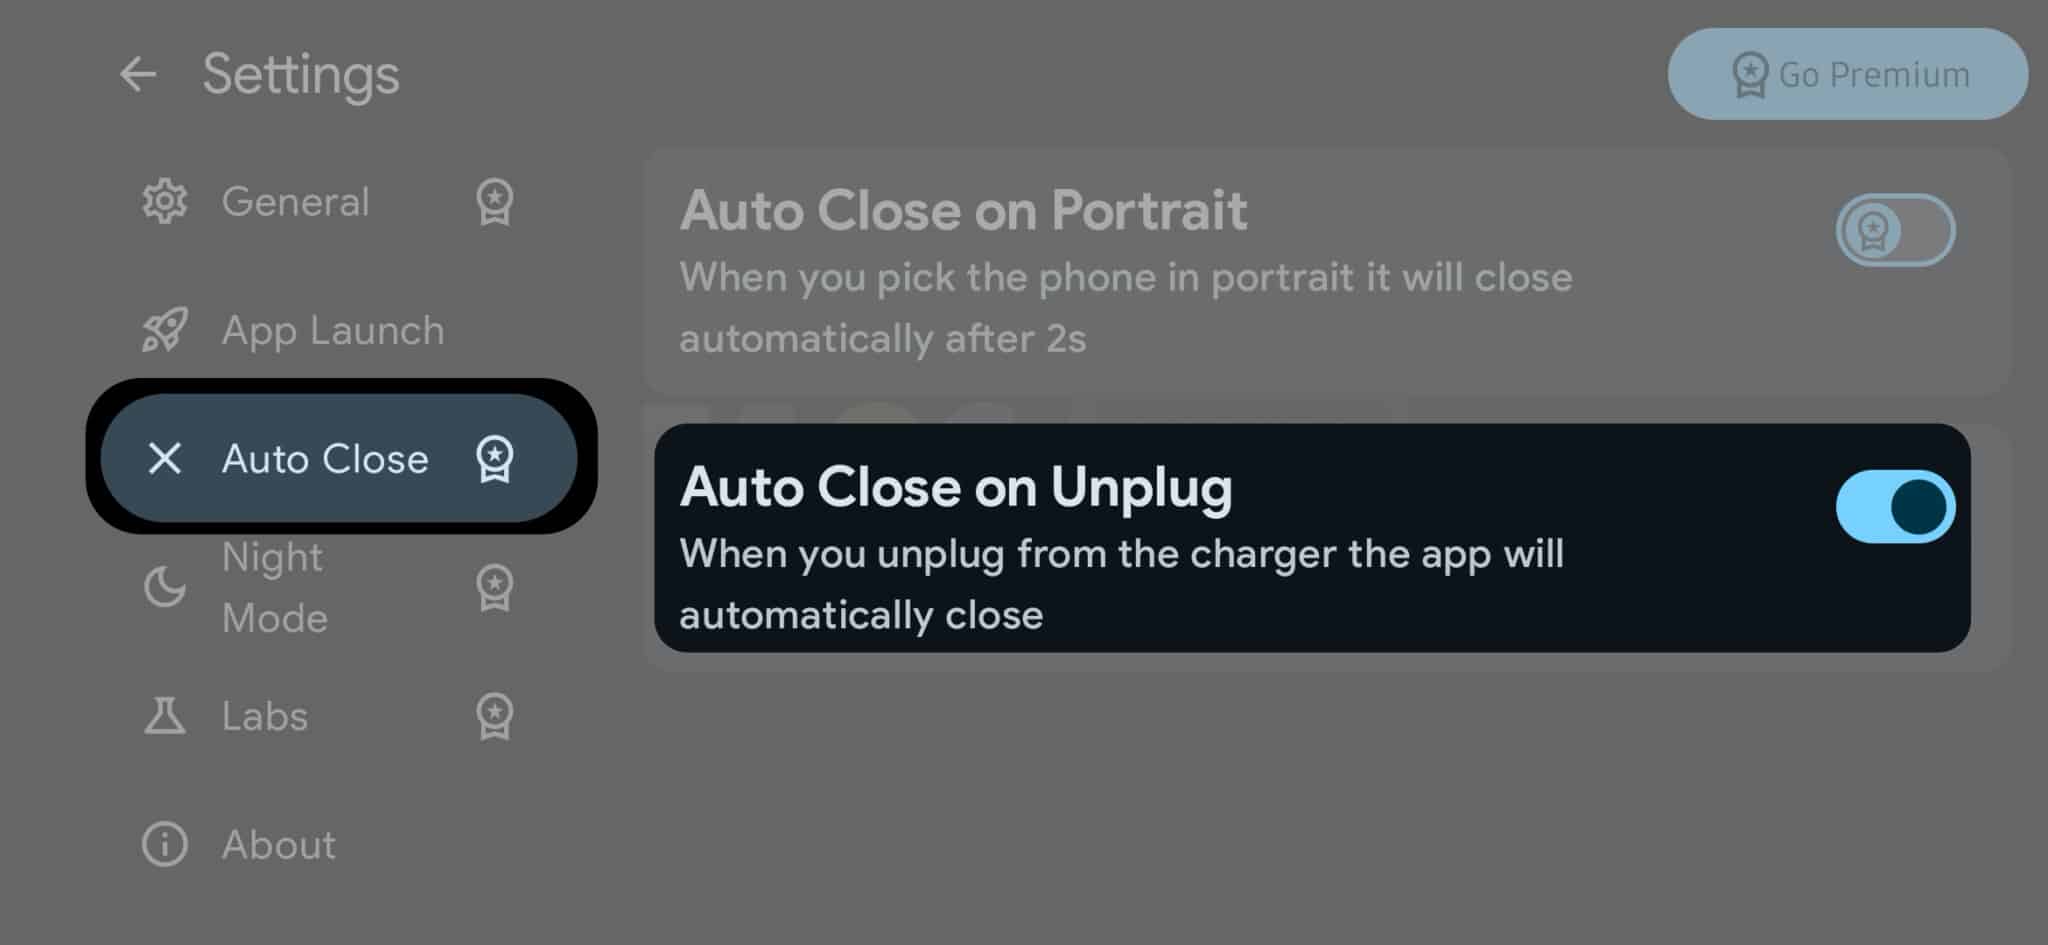 select-auto-close-and-turn-on-auto-close-on-unplug-in-standby-mode-pro-app-scaled